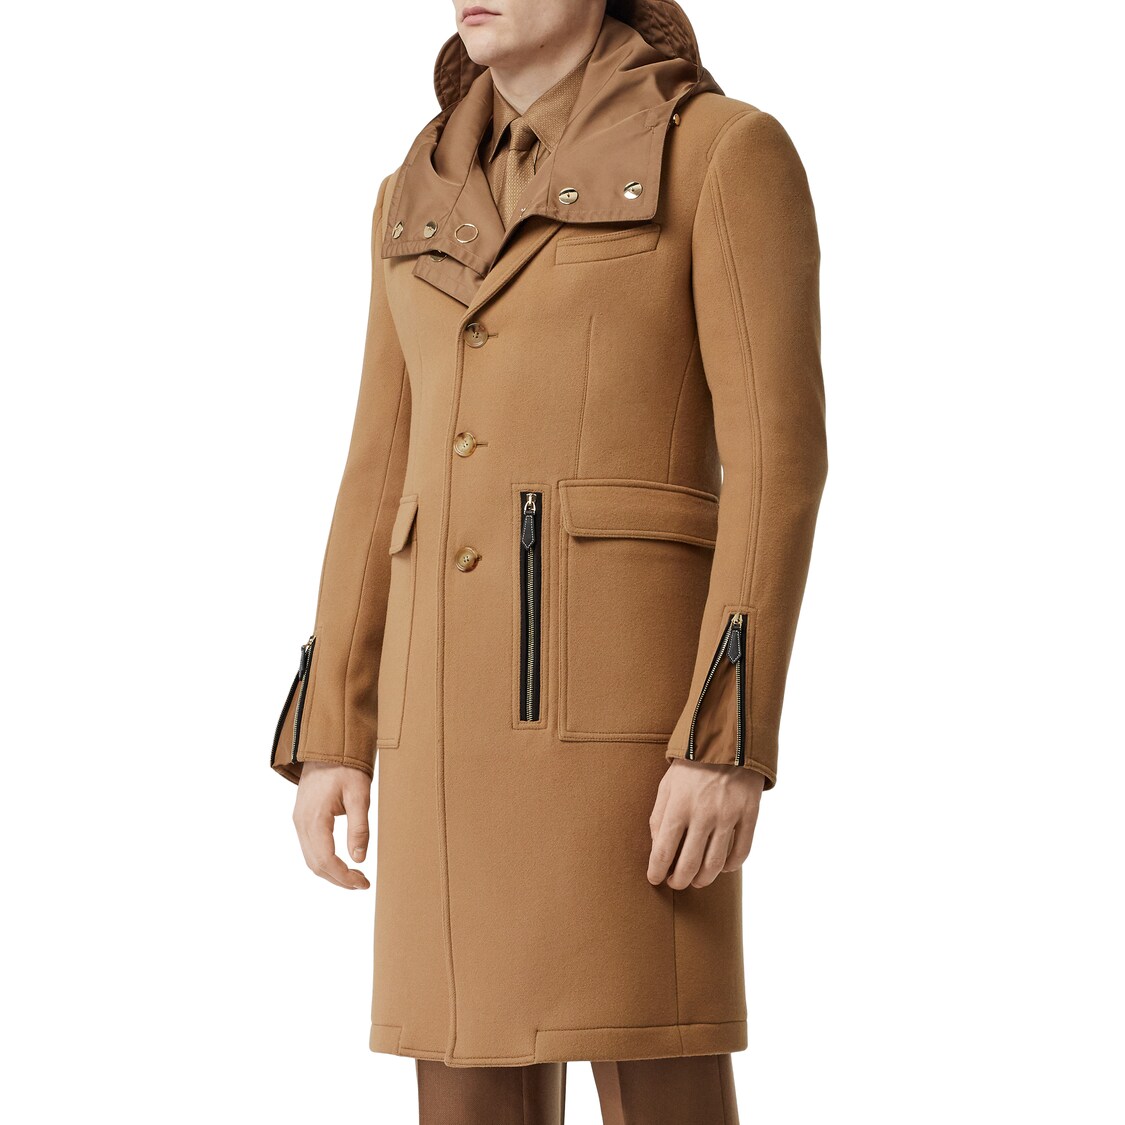 Burberry 羊毛大衣 In Warm Camel